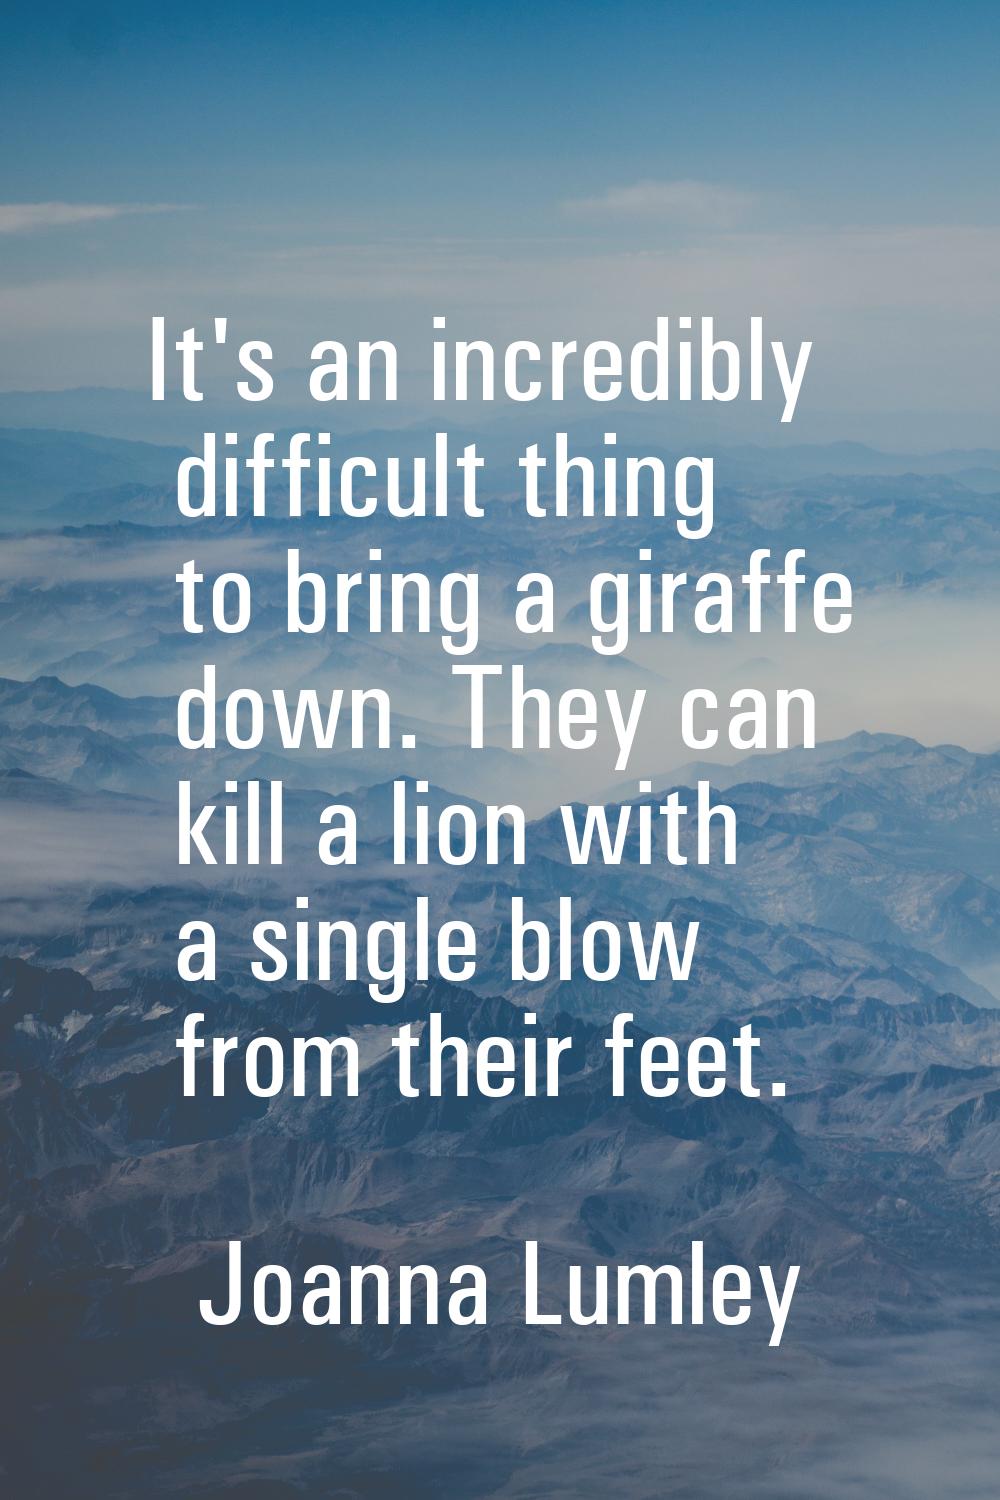 It's an incredibly difficult thing to bring a giraffe down. They can kill a lion with a single blow